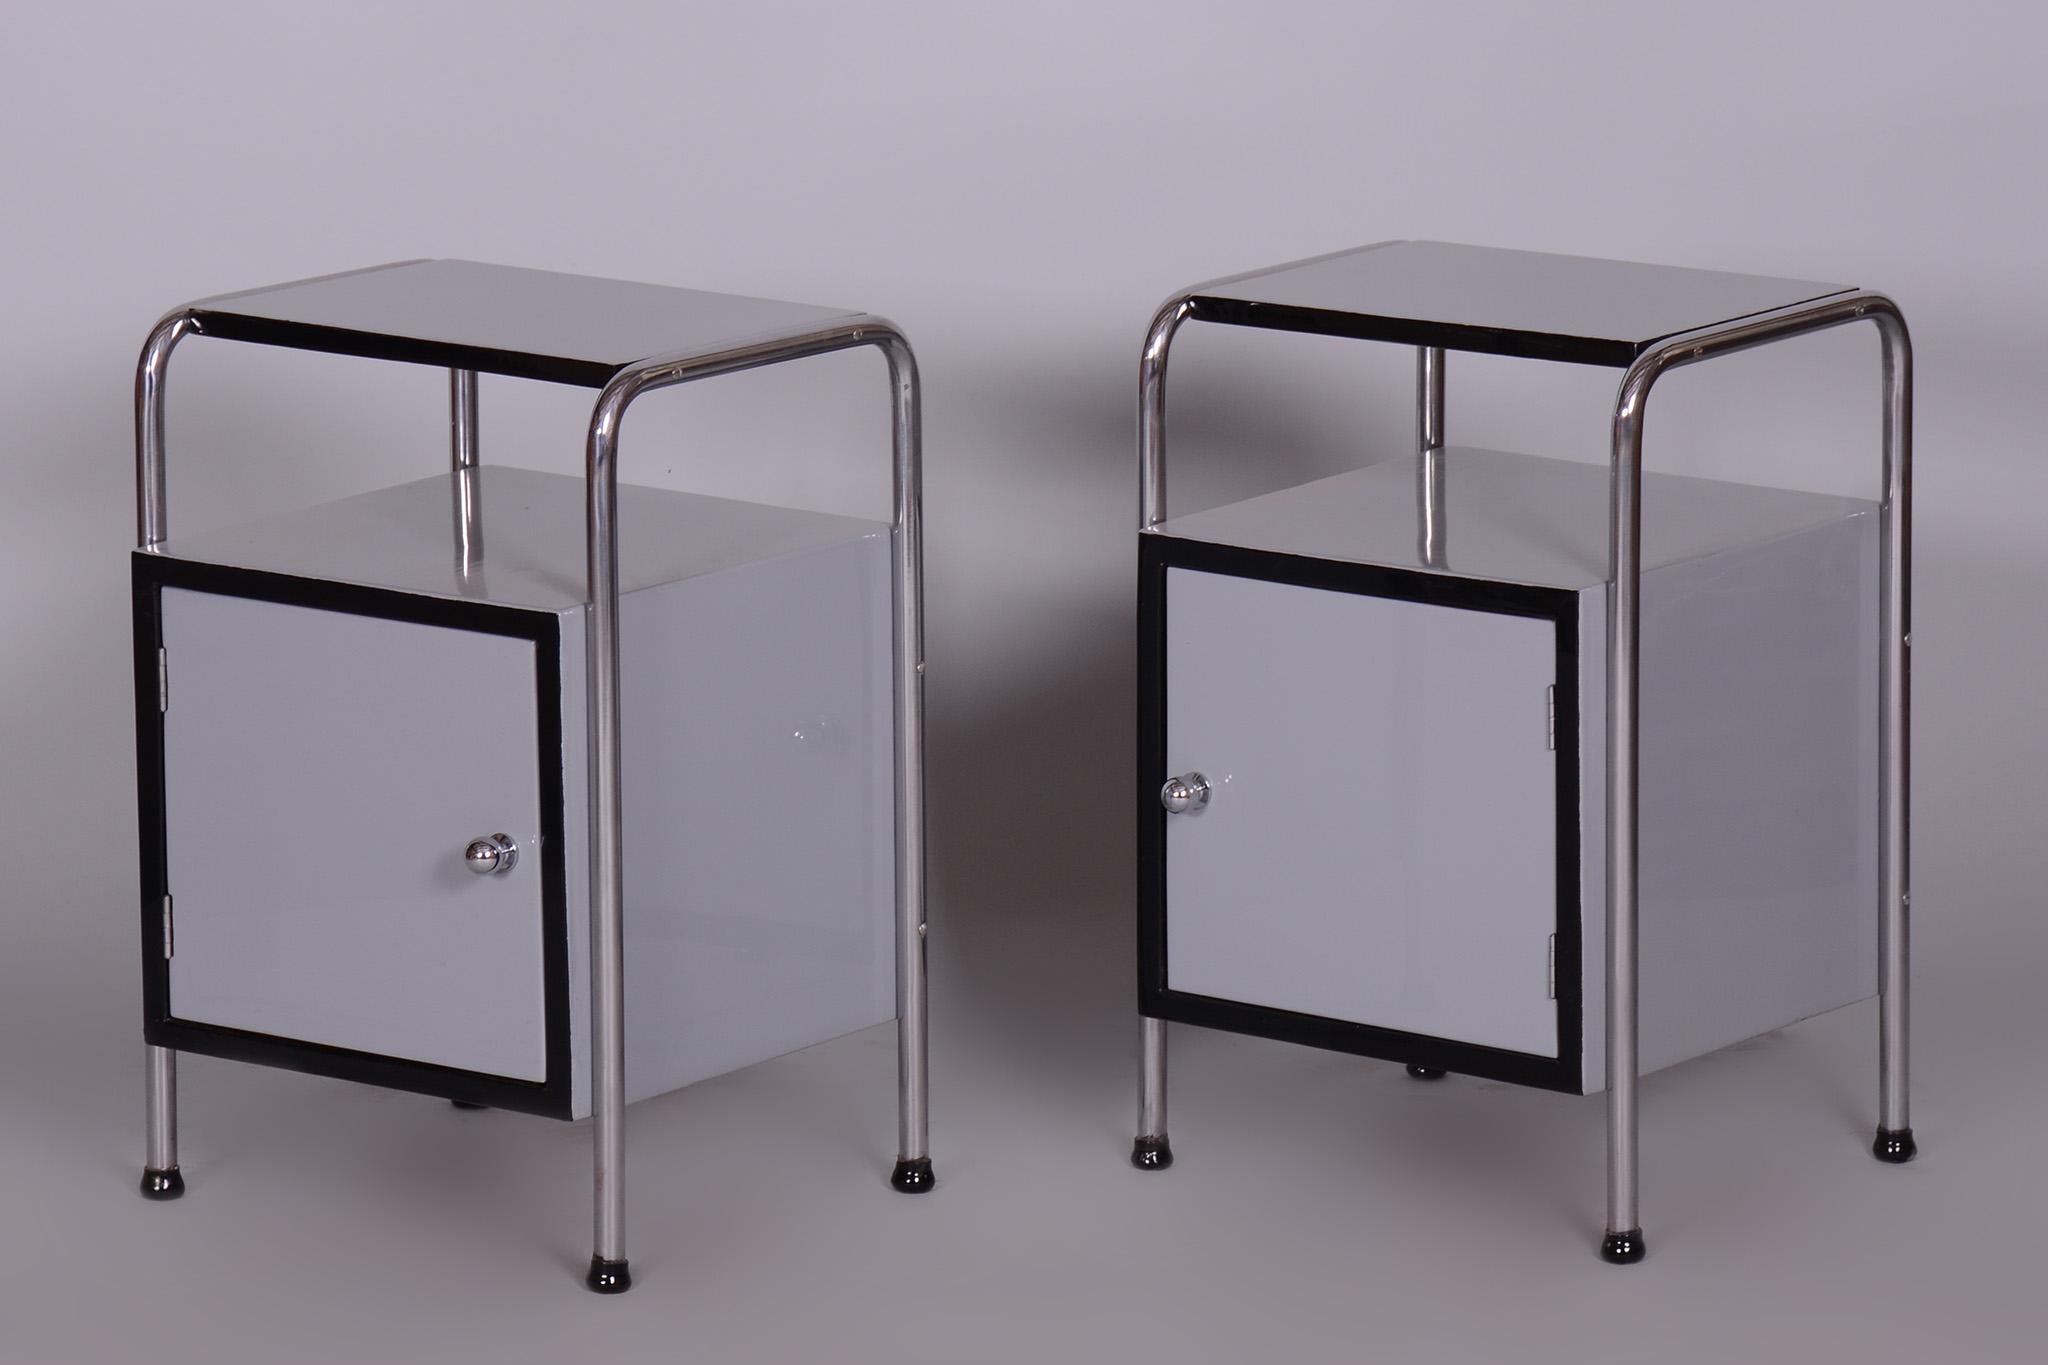 Bauhaus Restored Bed-Side Tables, Vichr a Spol, Chrome-Plated Steel, Czechia, 1930s For Sale